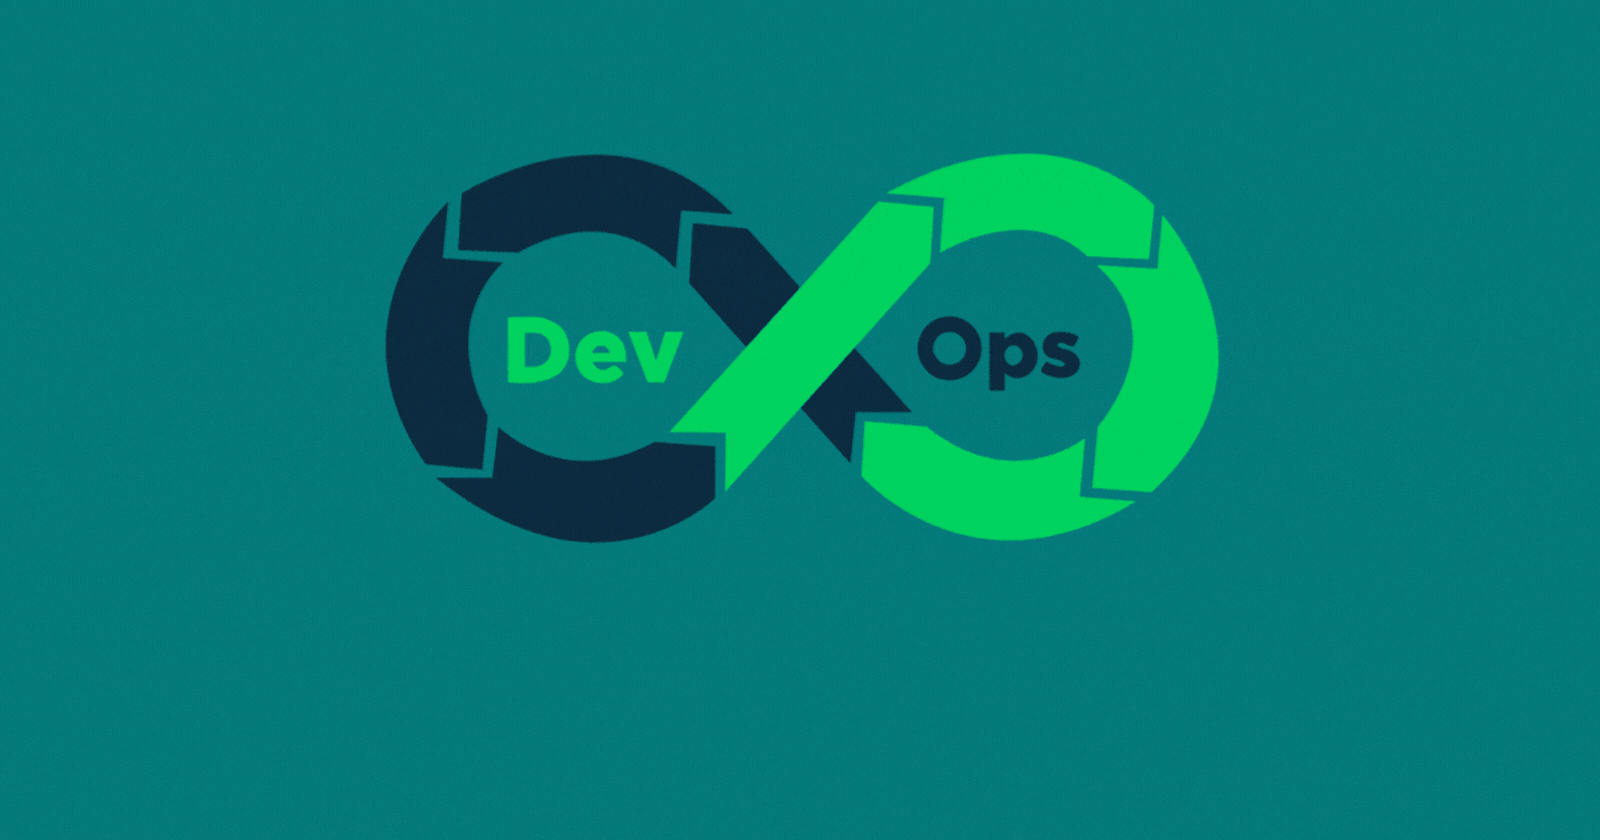 The fusion of development and operations- DevOps